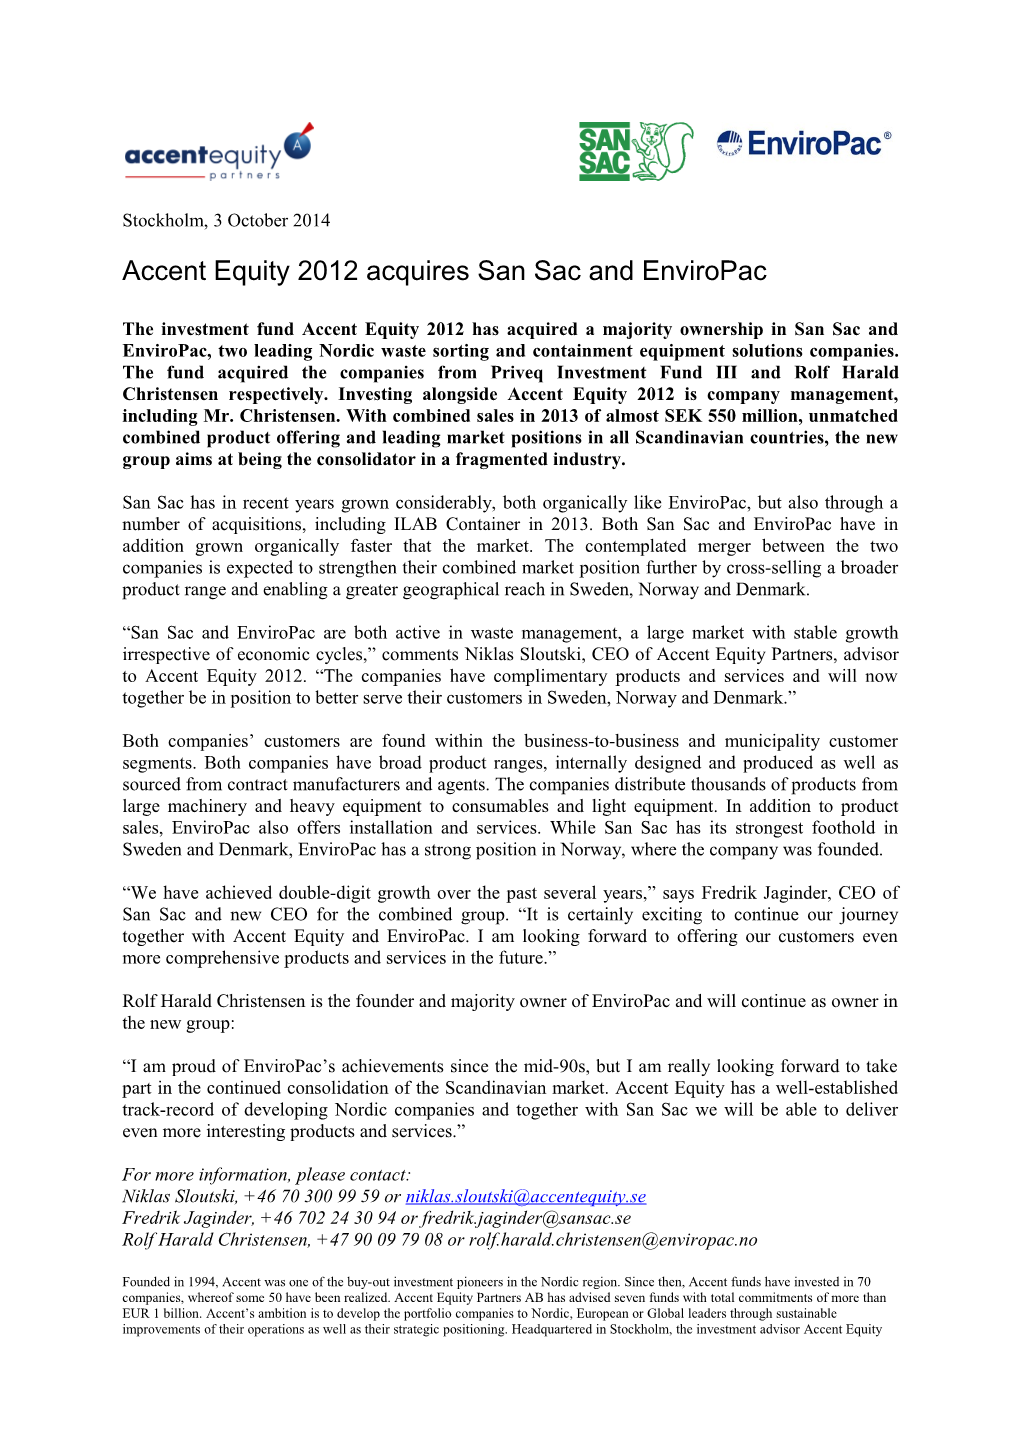 Accent Equity 2012 Acquires San Sac and Enviropac